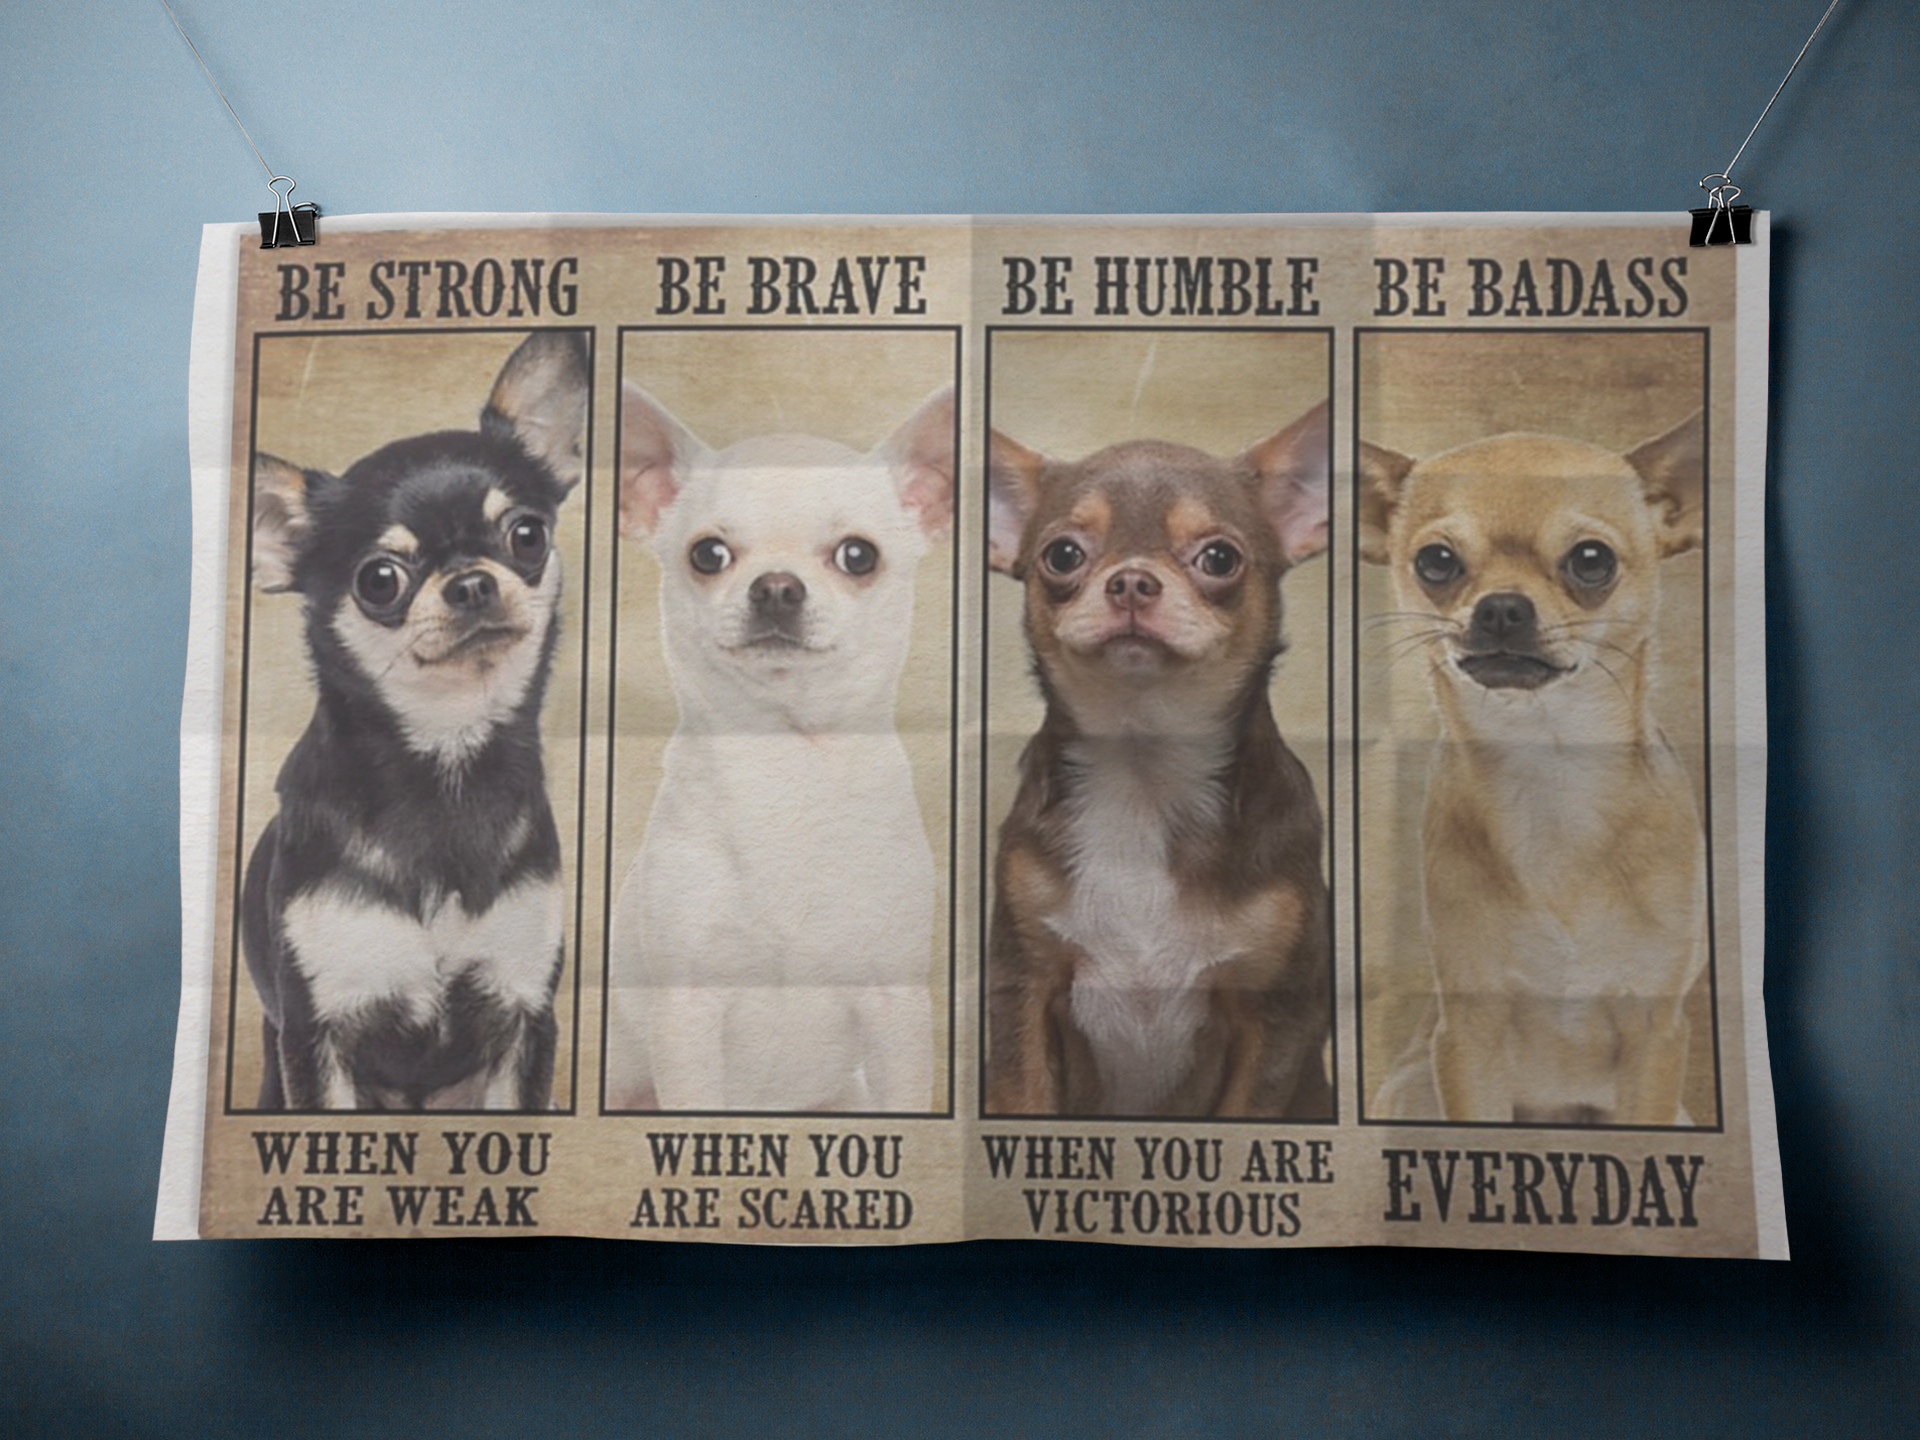 Chiahuahua be strong be brave be humble be badass poster 4